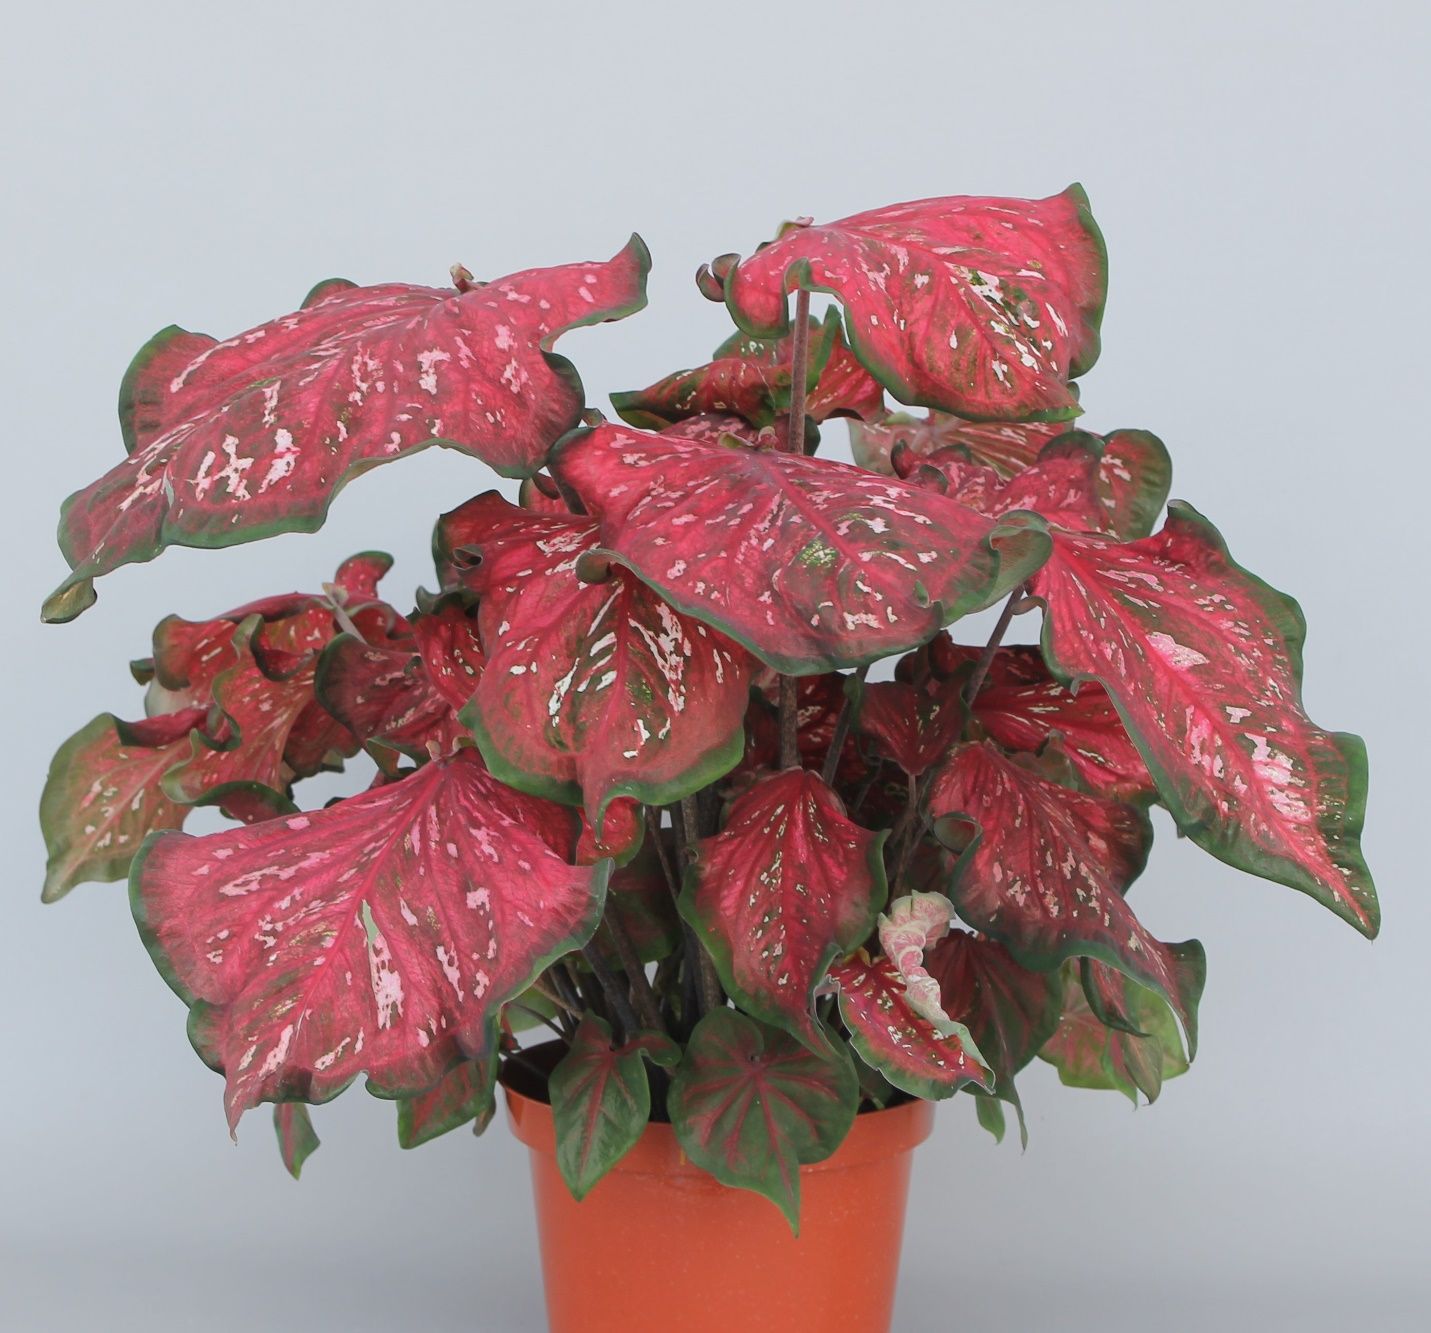 A typical plant of ‘Pink Panther’ caladium (47 days old) forced from four No.1-sized (1.5 to 2.5 inches) tubers in an 8-inch container. 